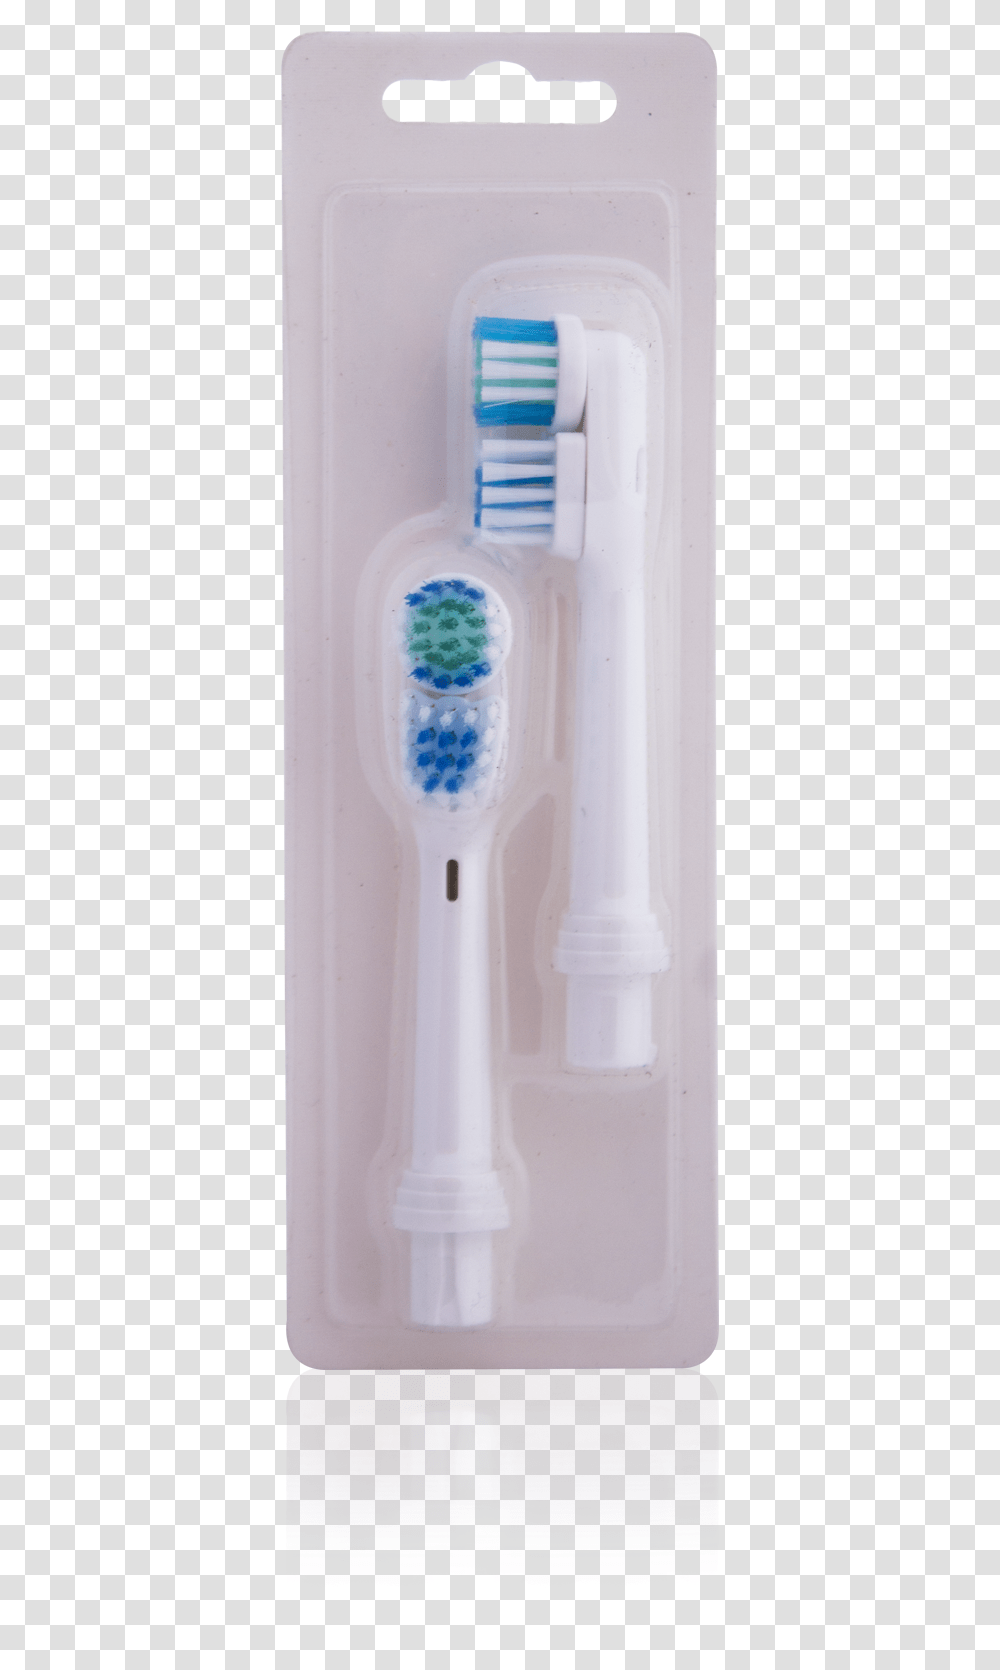 Sonic Head, Toothbrush, Tool, Refrigerator, Appliance Transparent Png